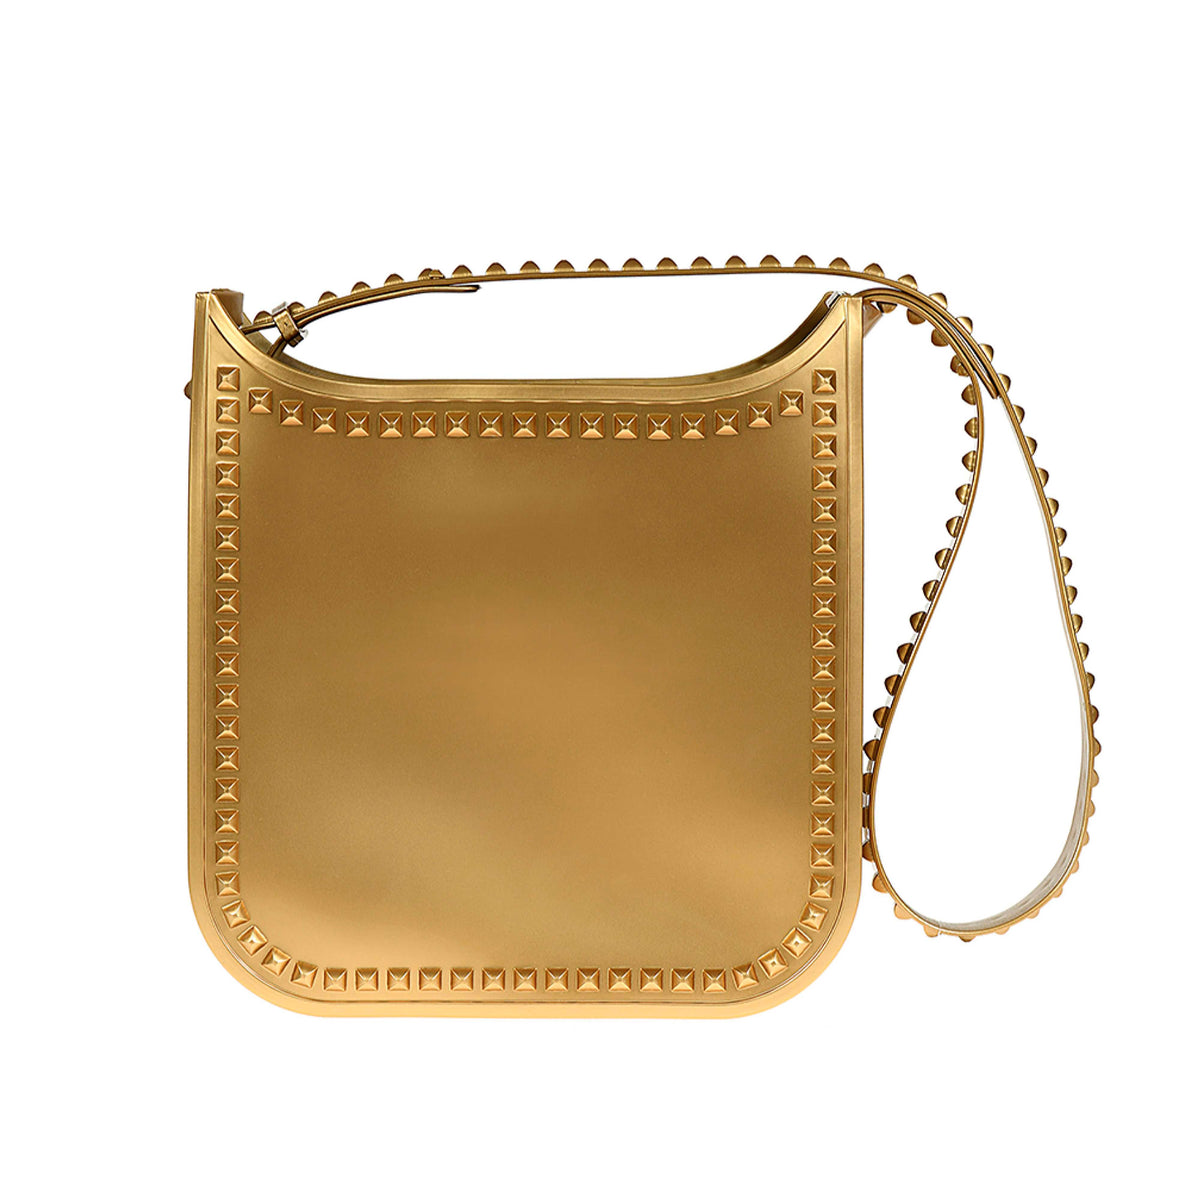 Gold studded large jelly purse from Carmen Sol